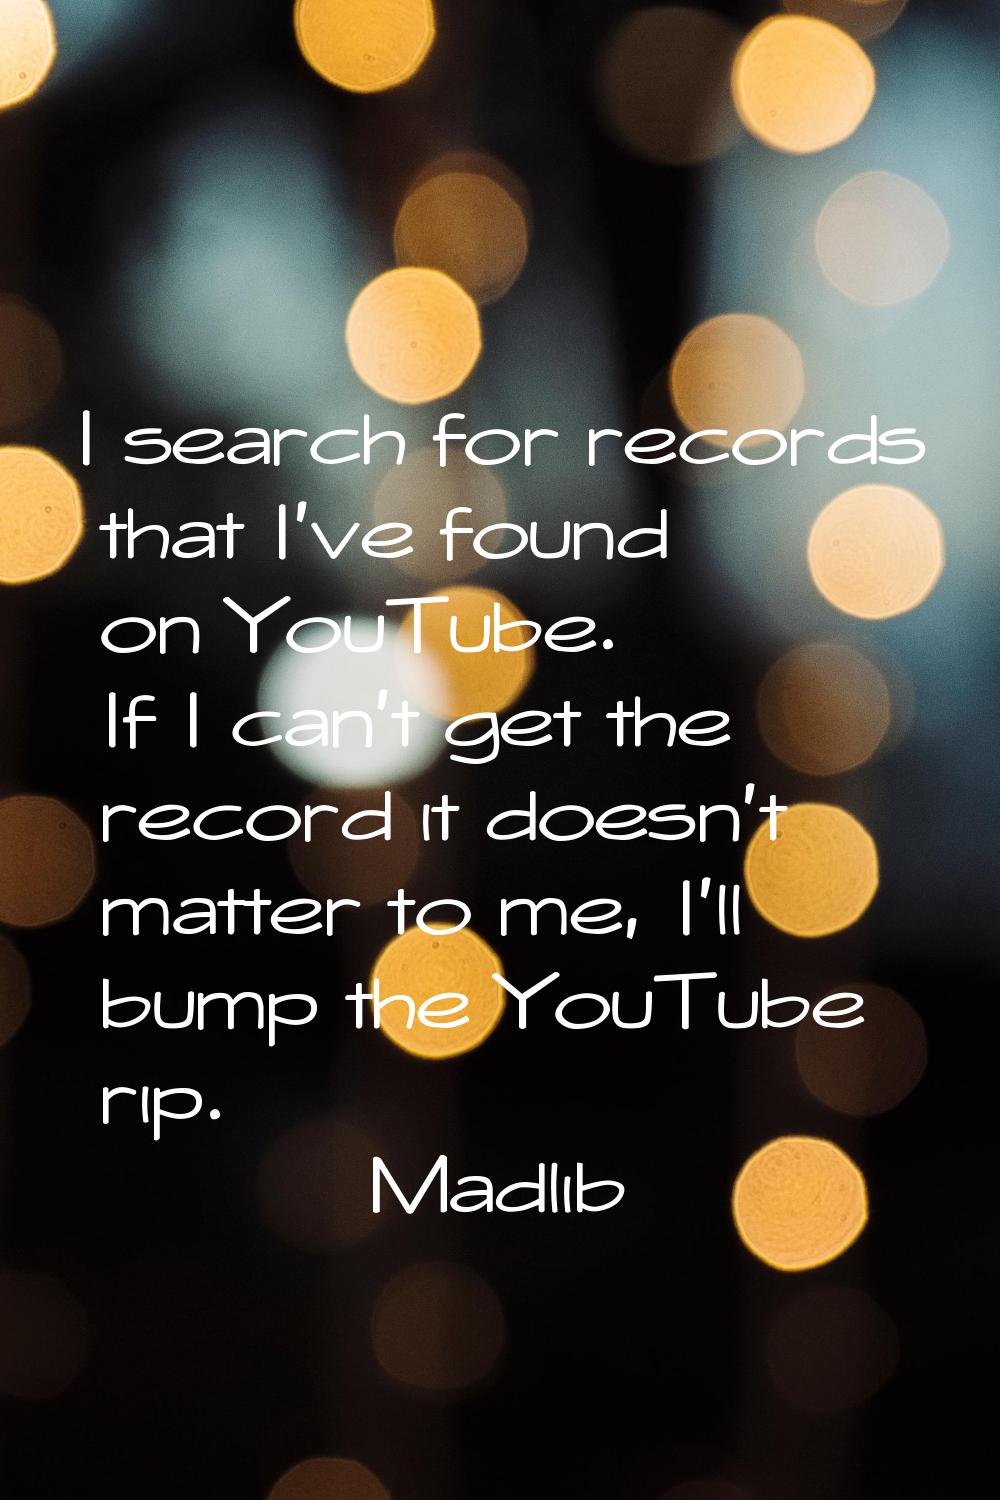 I search for records that I've found on YouTube. If I can't get the record it doesn't matter to me,